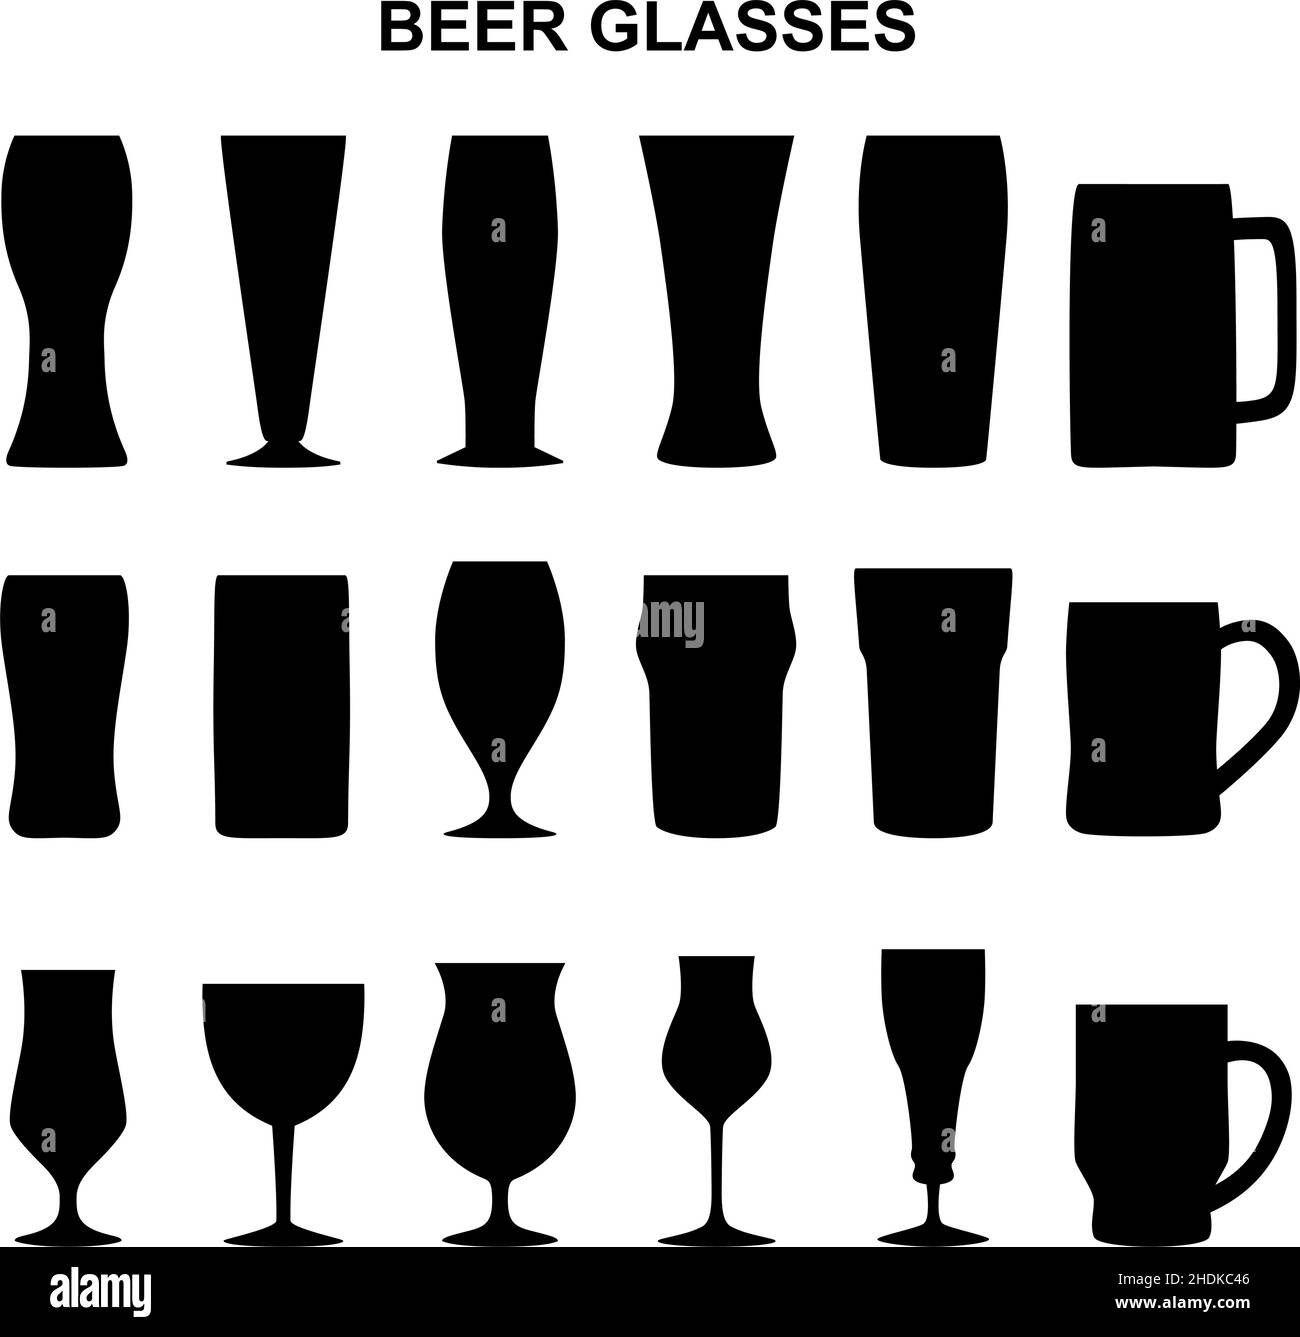 Set of silhouettes of beer glasses, vector illustration Stock Vector